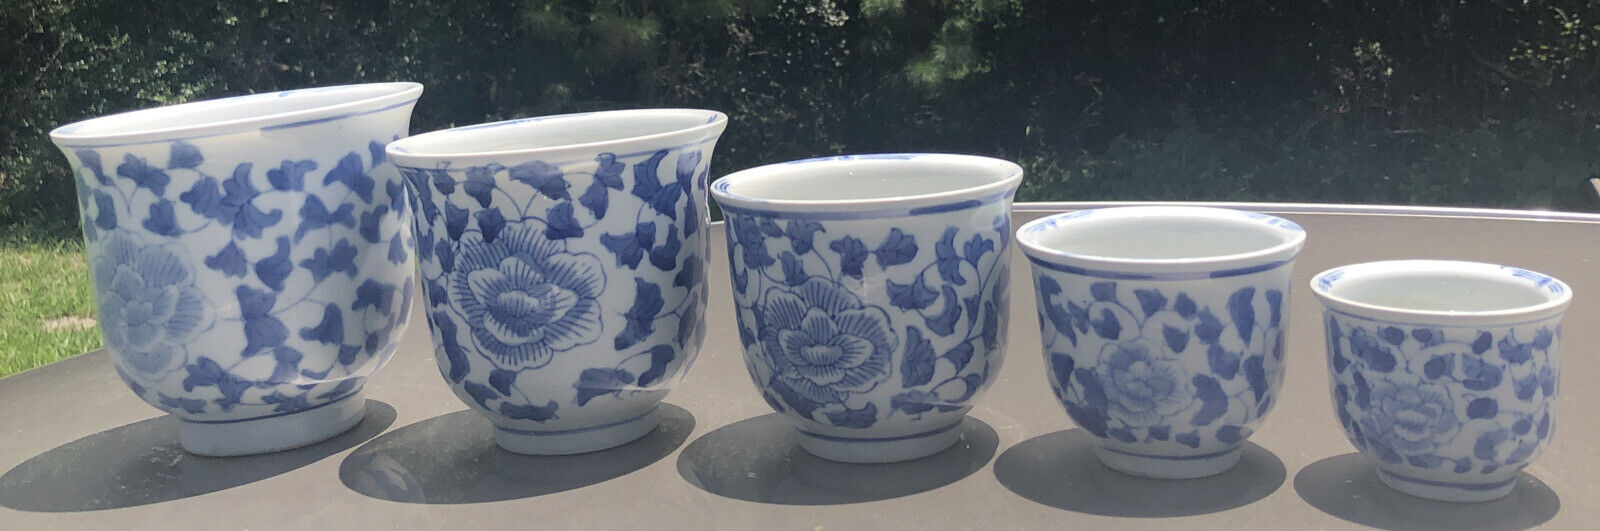 Vintage Retro Chinese Blue & White Nesting Bamboo Planters Chinoiserie 5 Pots